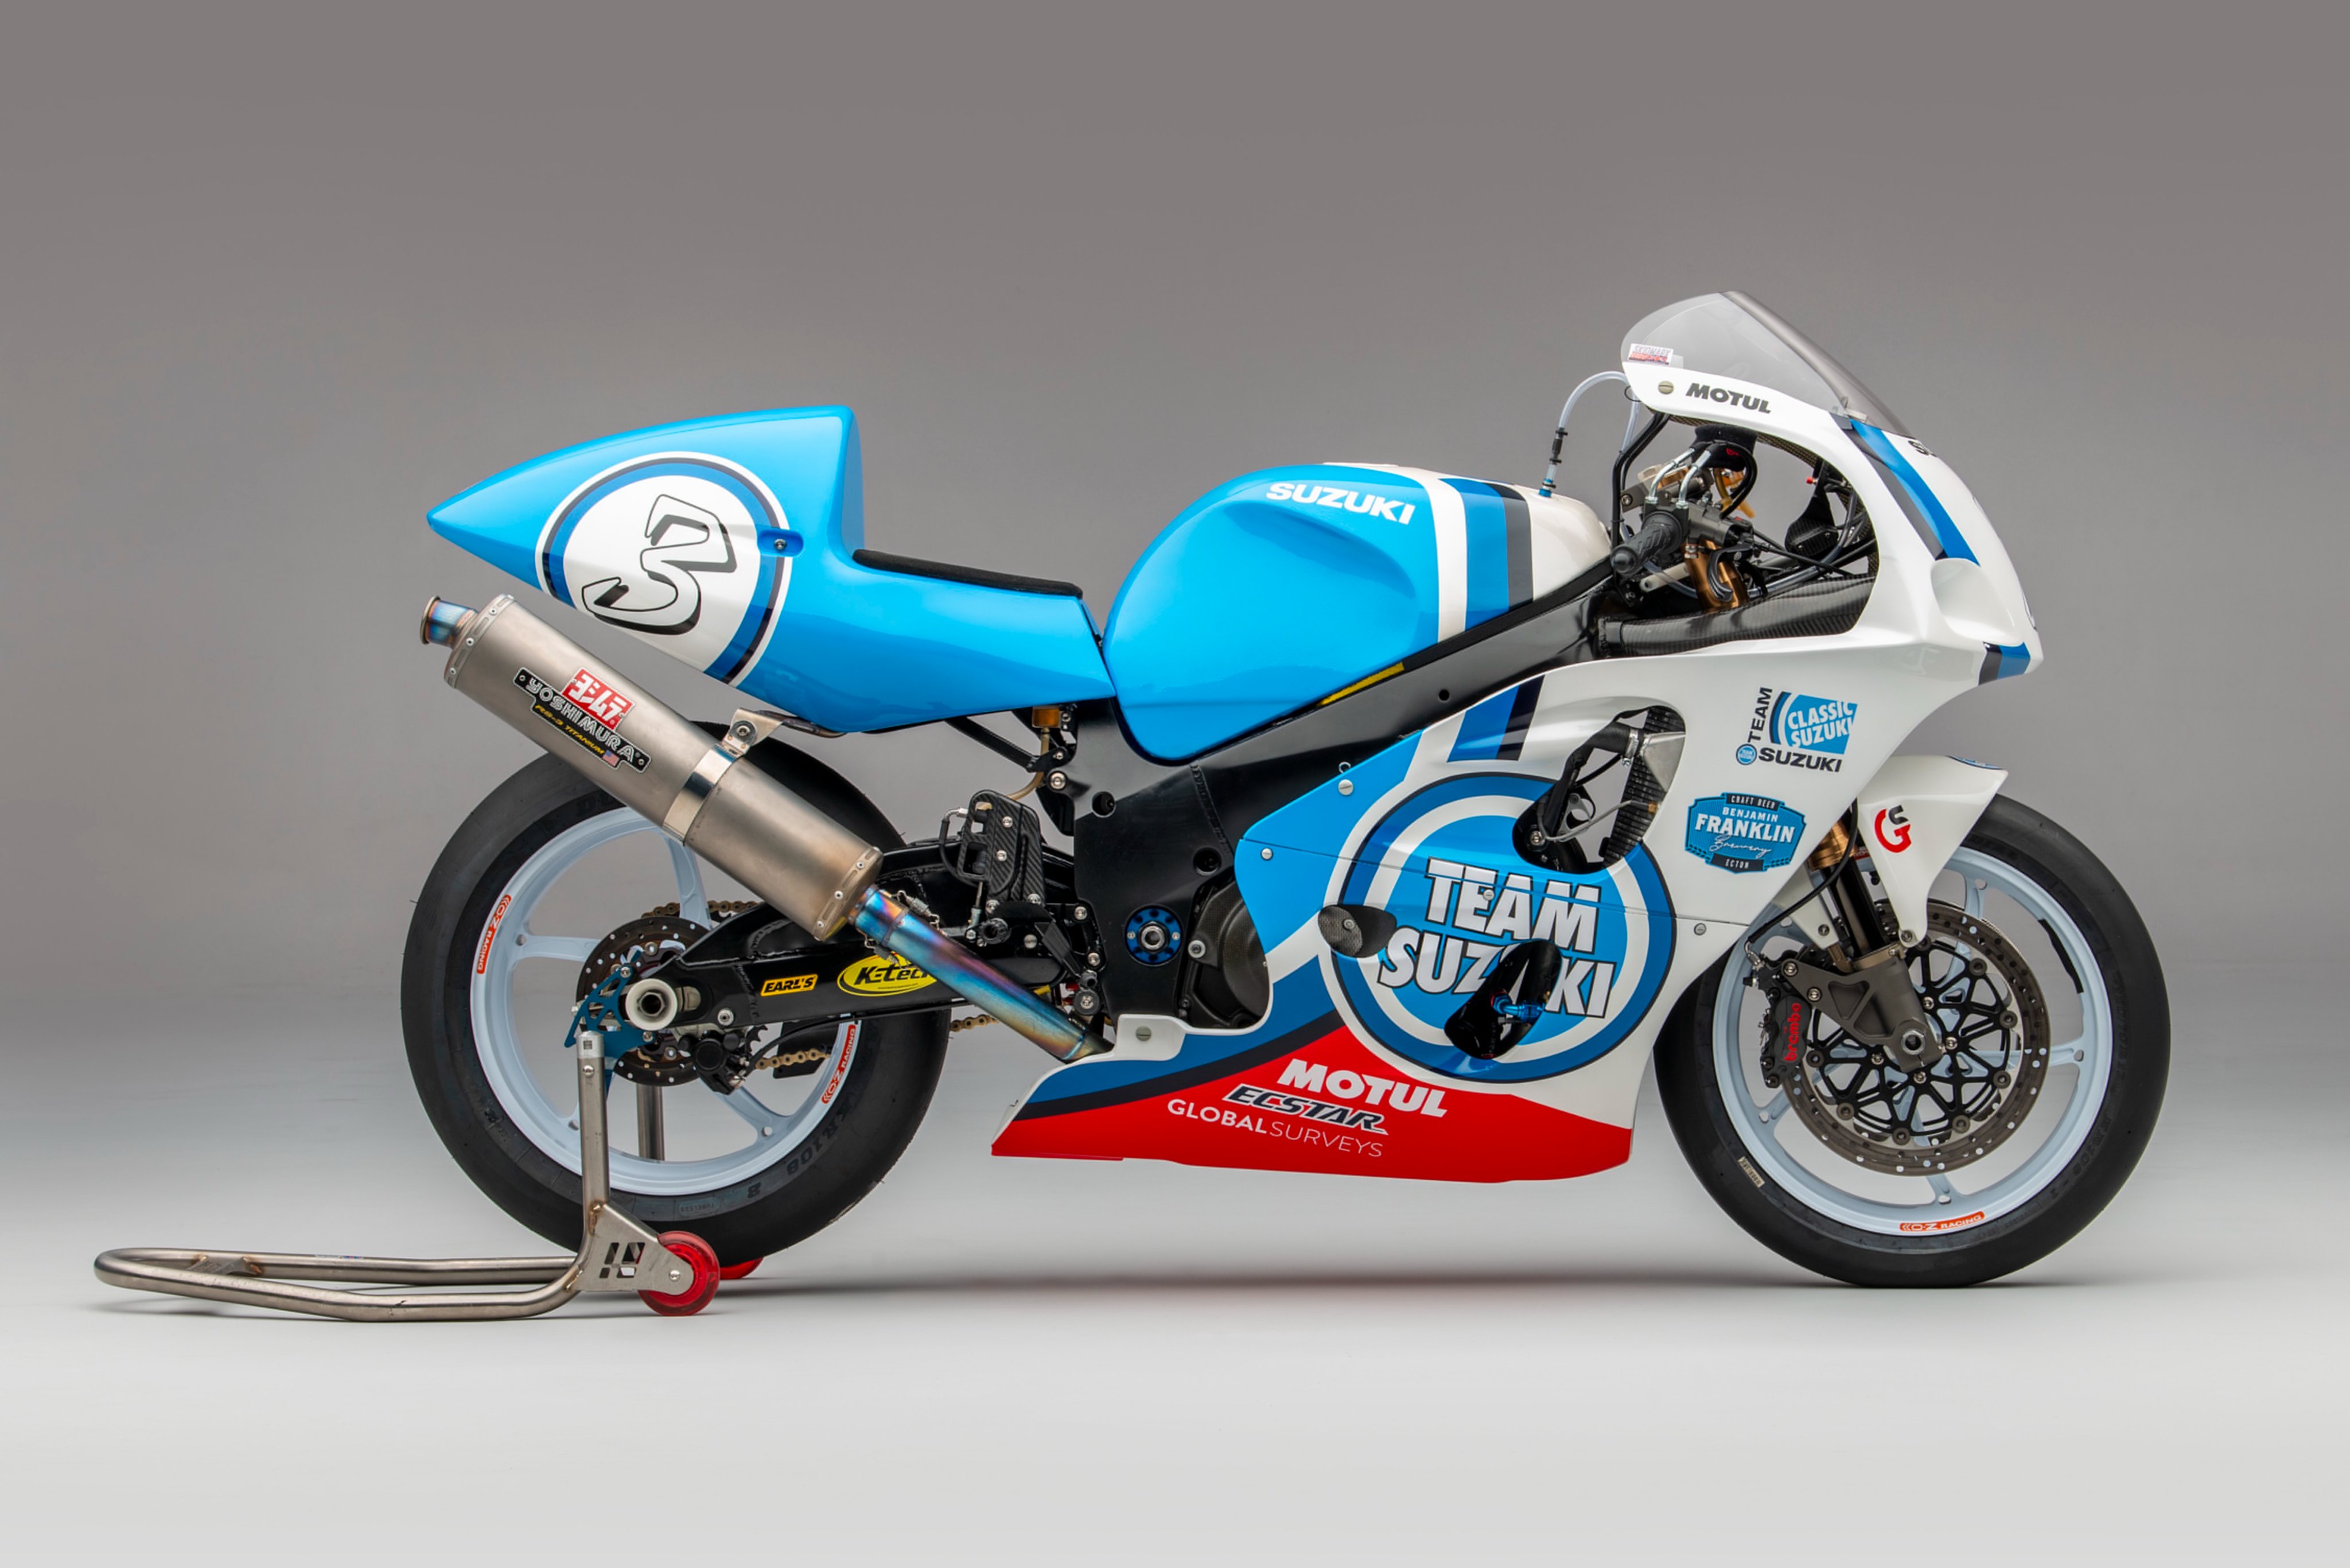 Suzuki Bikes UK on Twitter: "Team Classic Suzuki never disappoint 😍 Check out their latest race bike a 1996 750 SRAD built around a former factory endurance racer! read